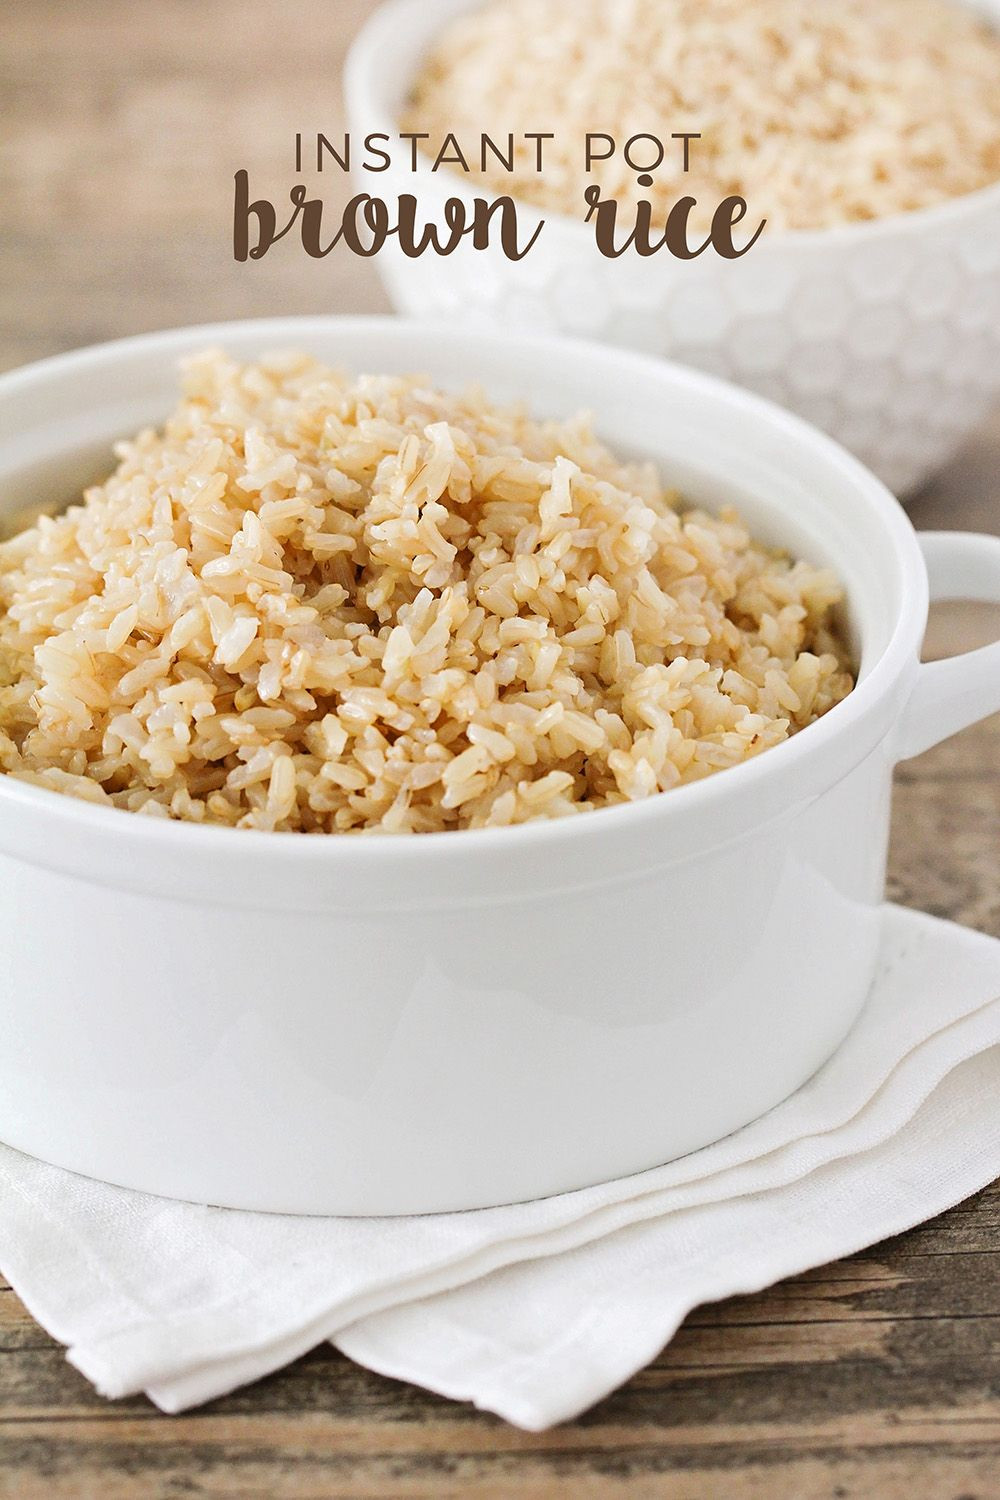 Brown Rice In Instant Pot
 Instant Pot Brown Rice